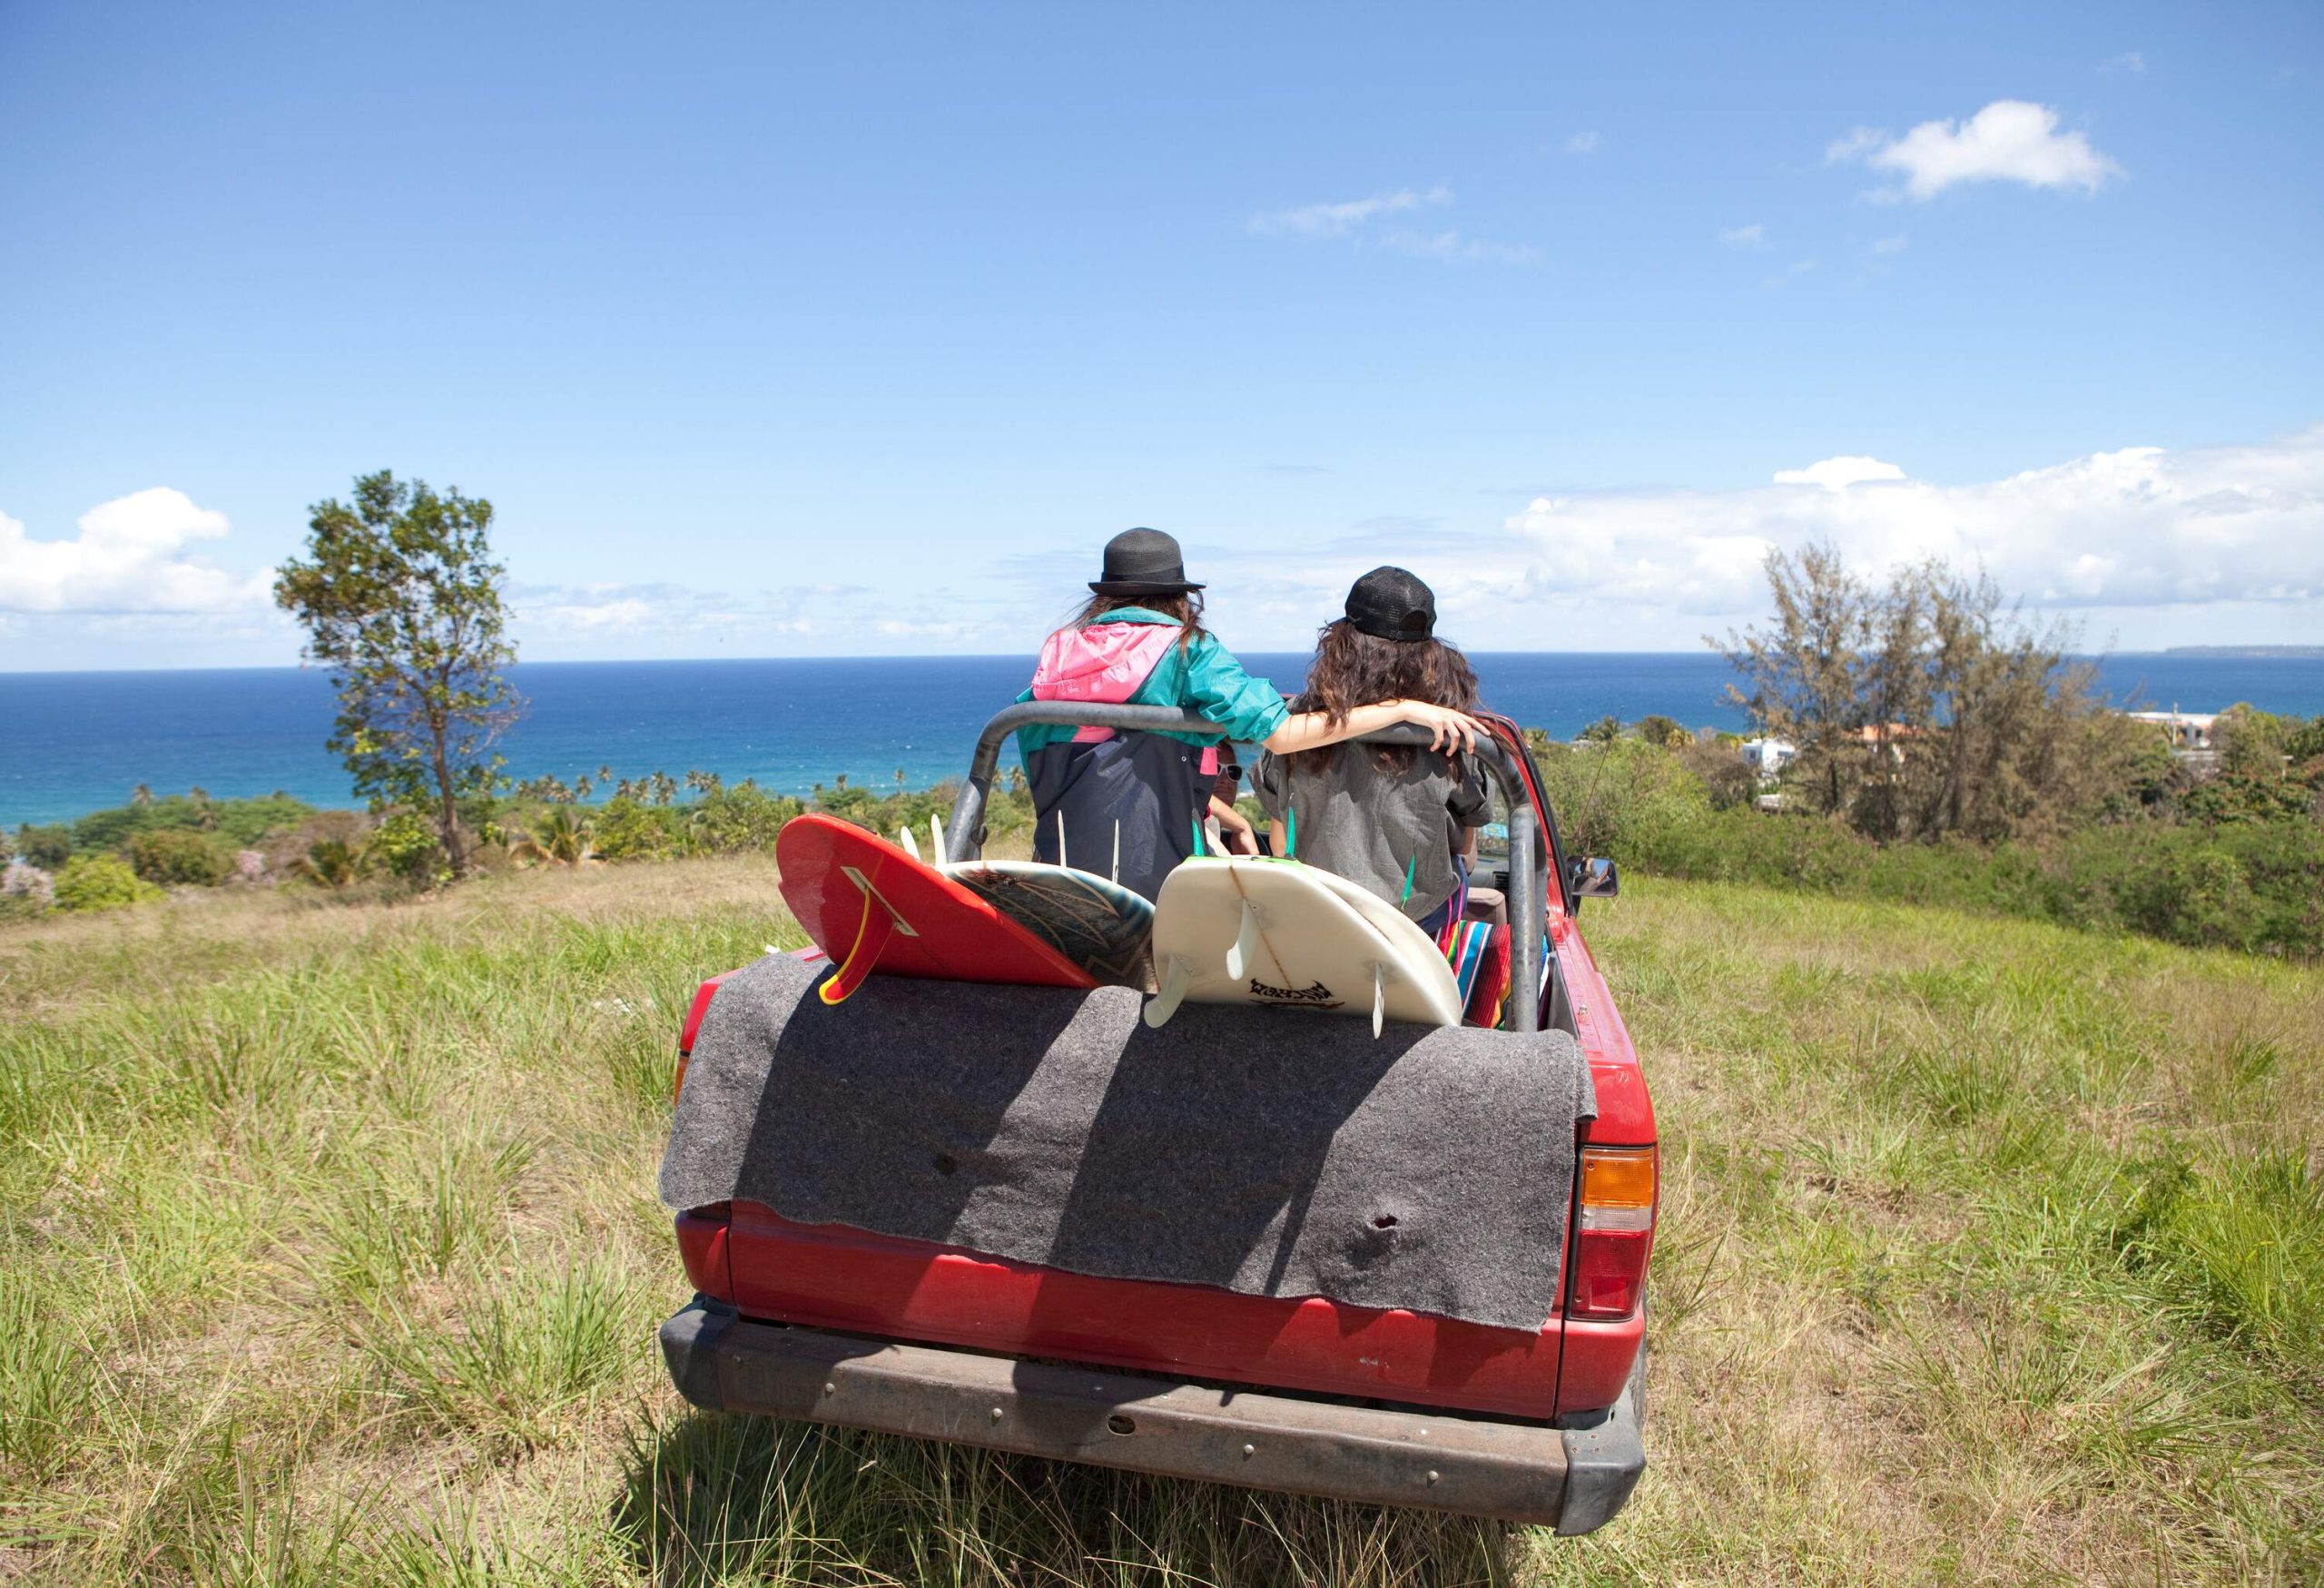 Two individuals were seated on the back of an open-roofed vehicle parked on the grassy landscape overlooking the blue sea.